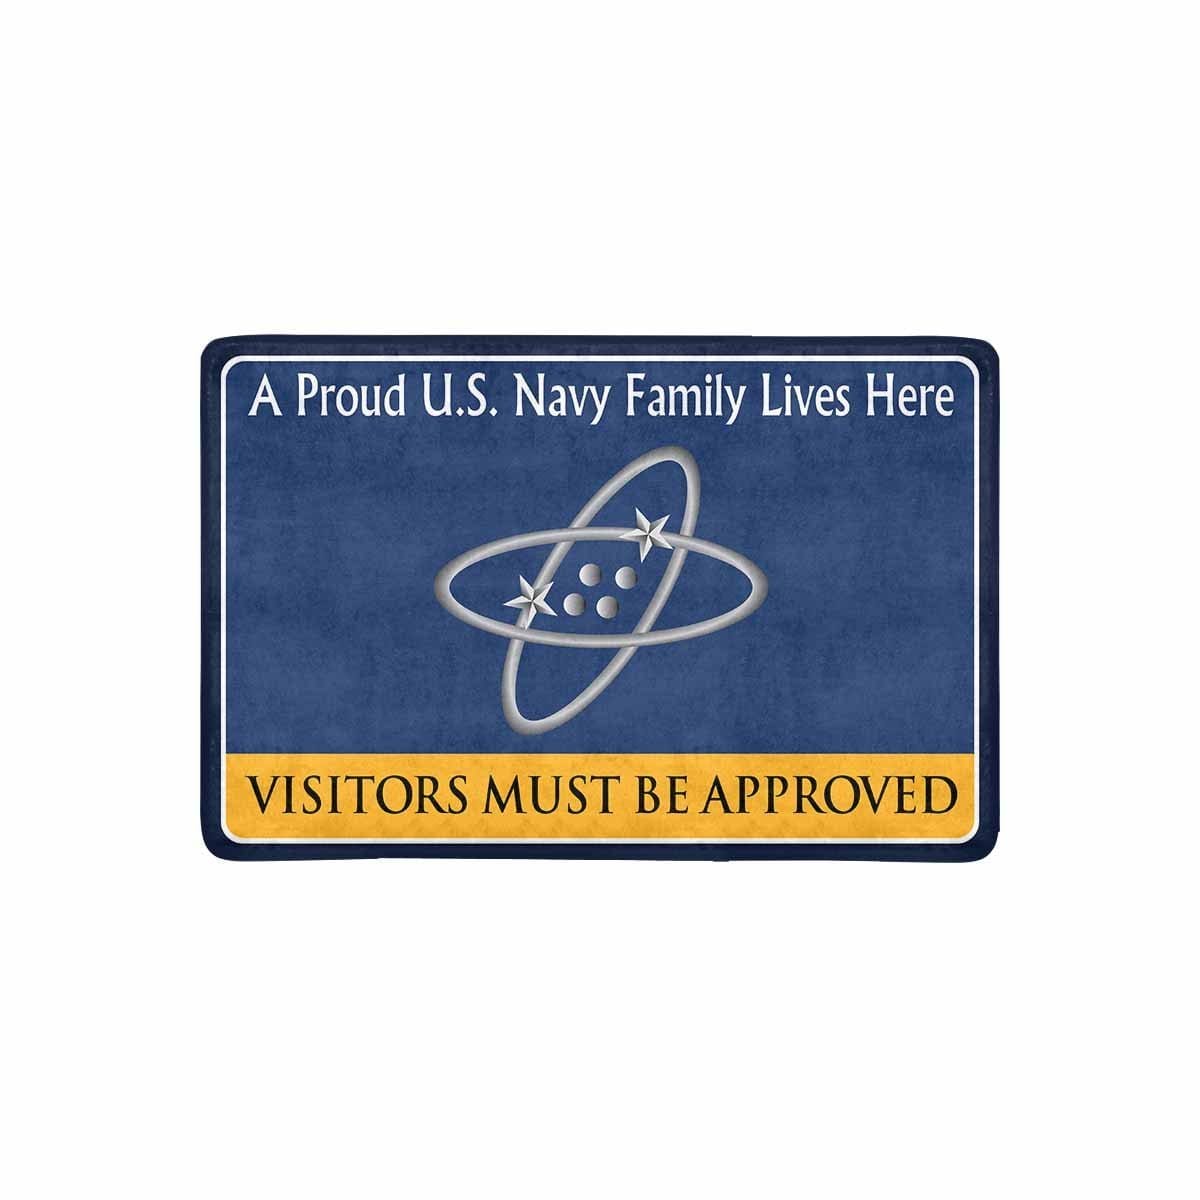 U.S Navy Electronics technician Navy ET Family Doormat - Visitors must be approved (23,6 inches x 15,7 inches)-Doormat-Navy-Rate-Veterans Nation